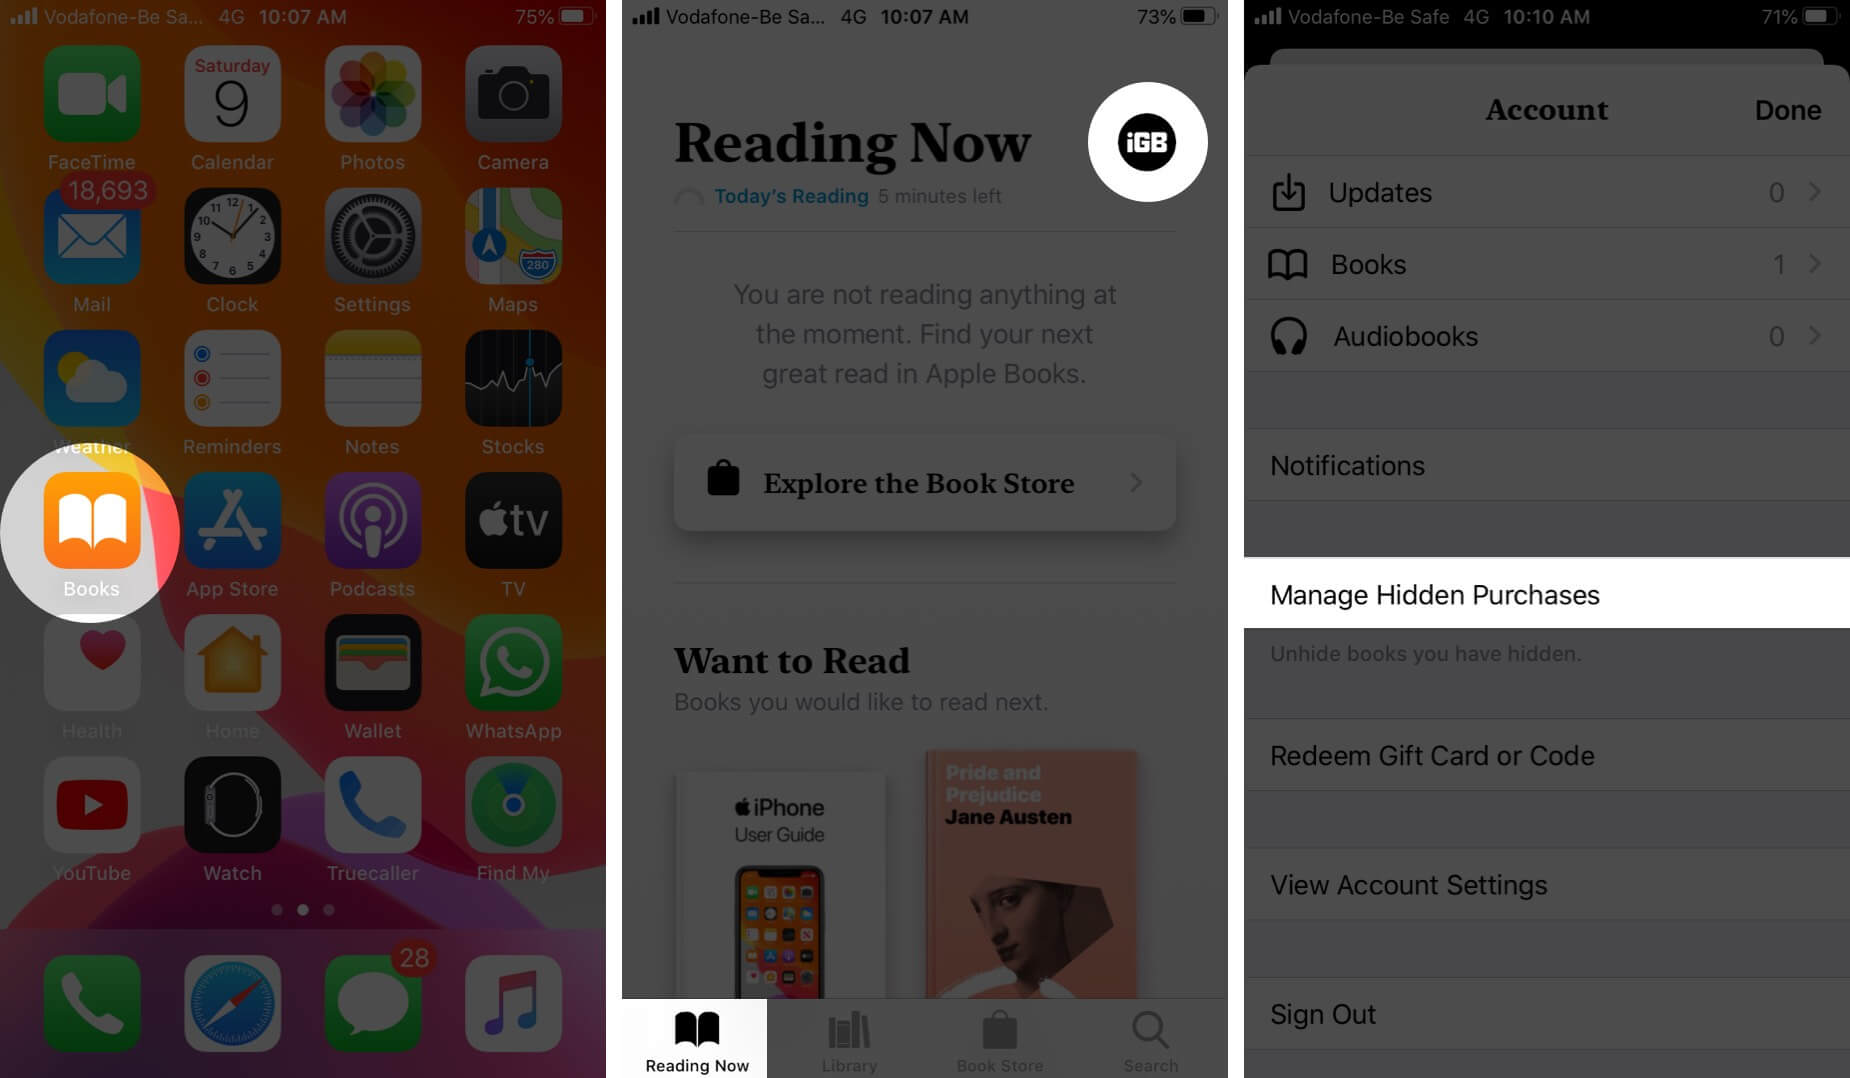 Open Books App Tap on Profile and Then Tap on Manage Hidden Purchases